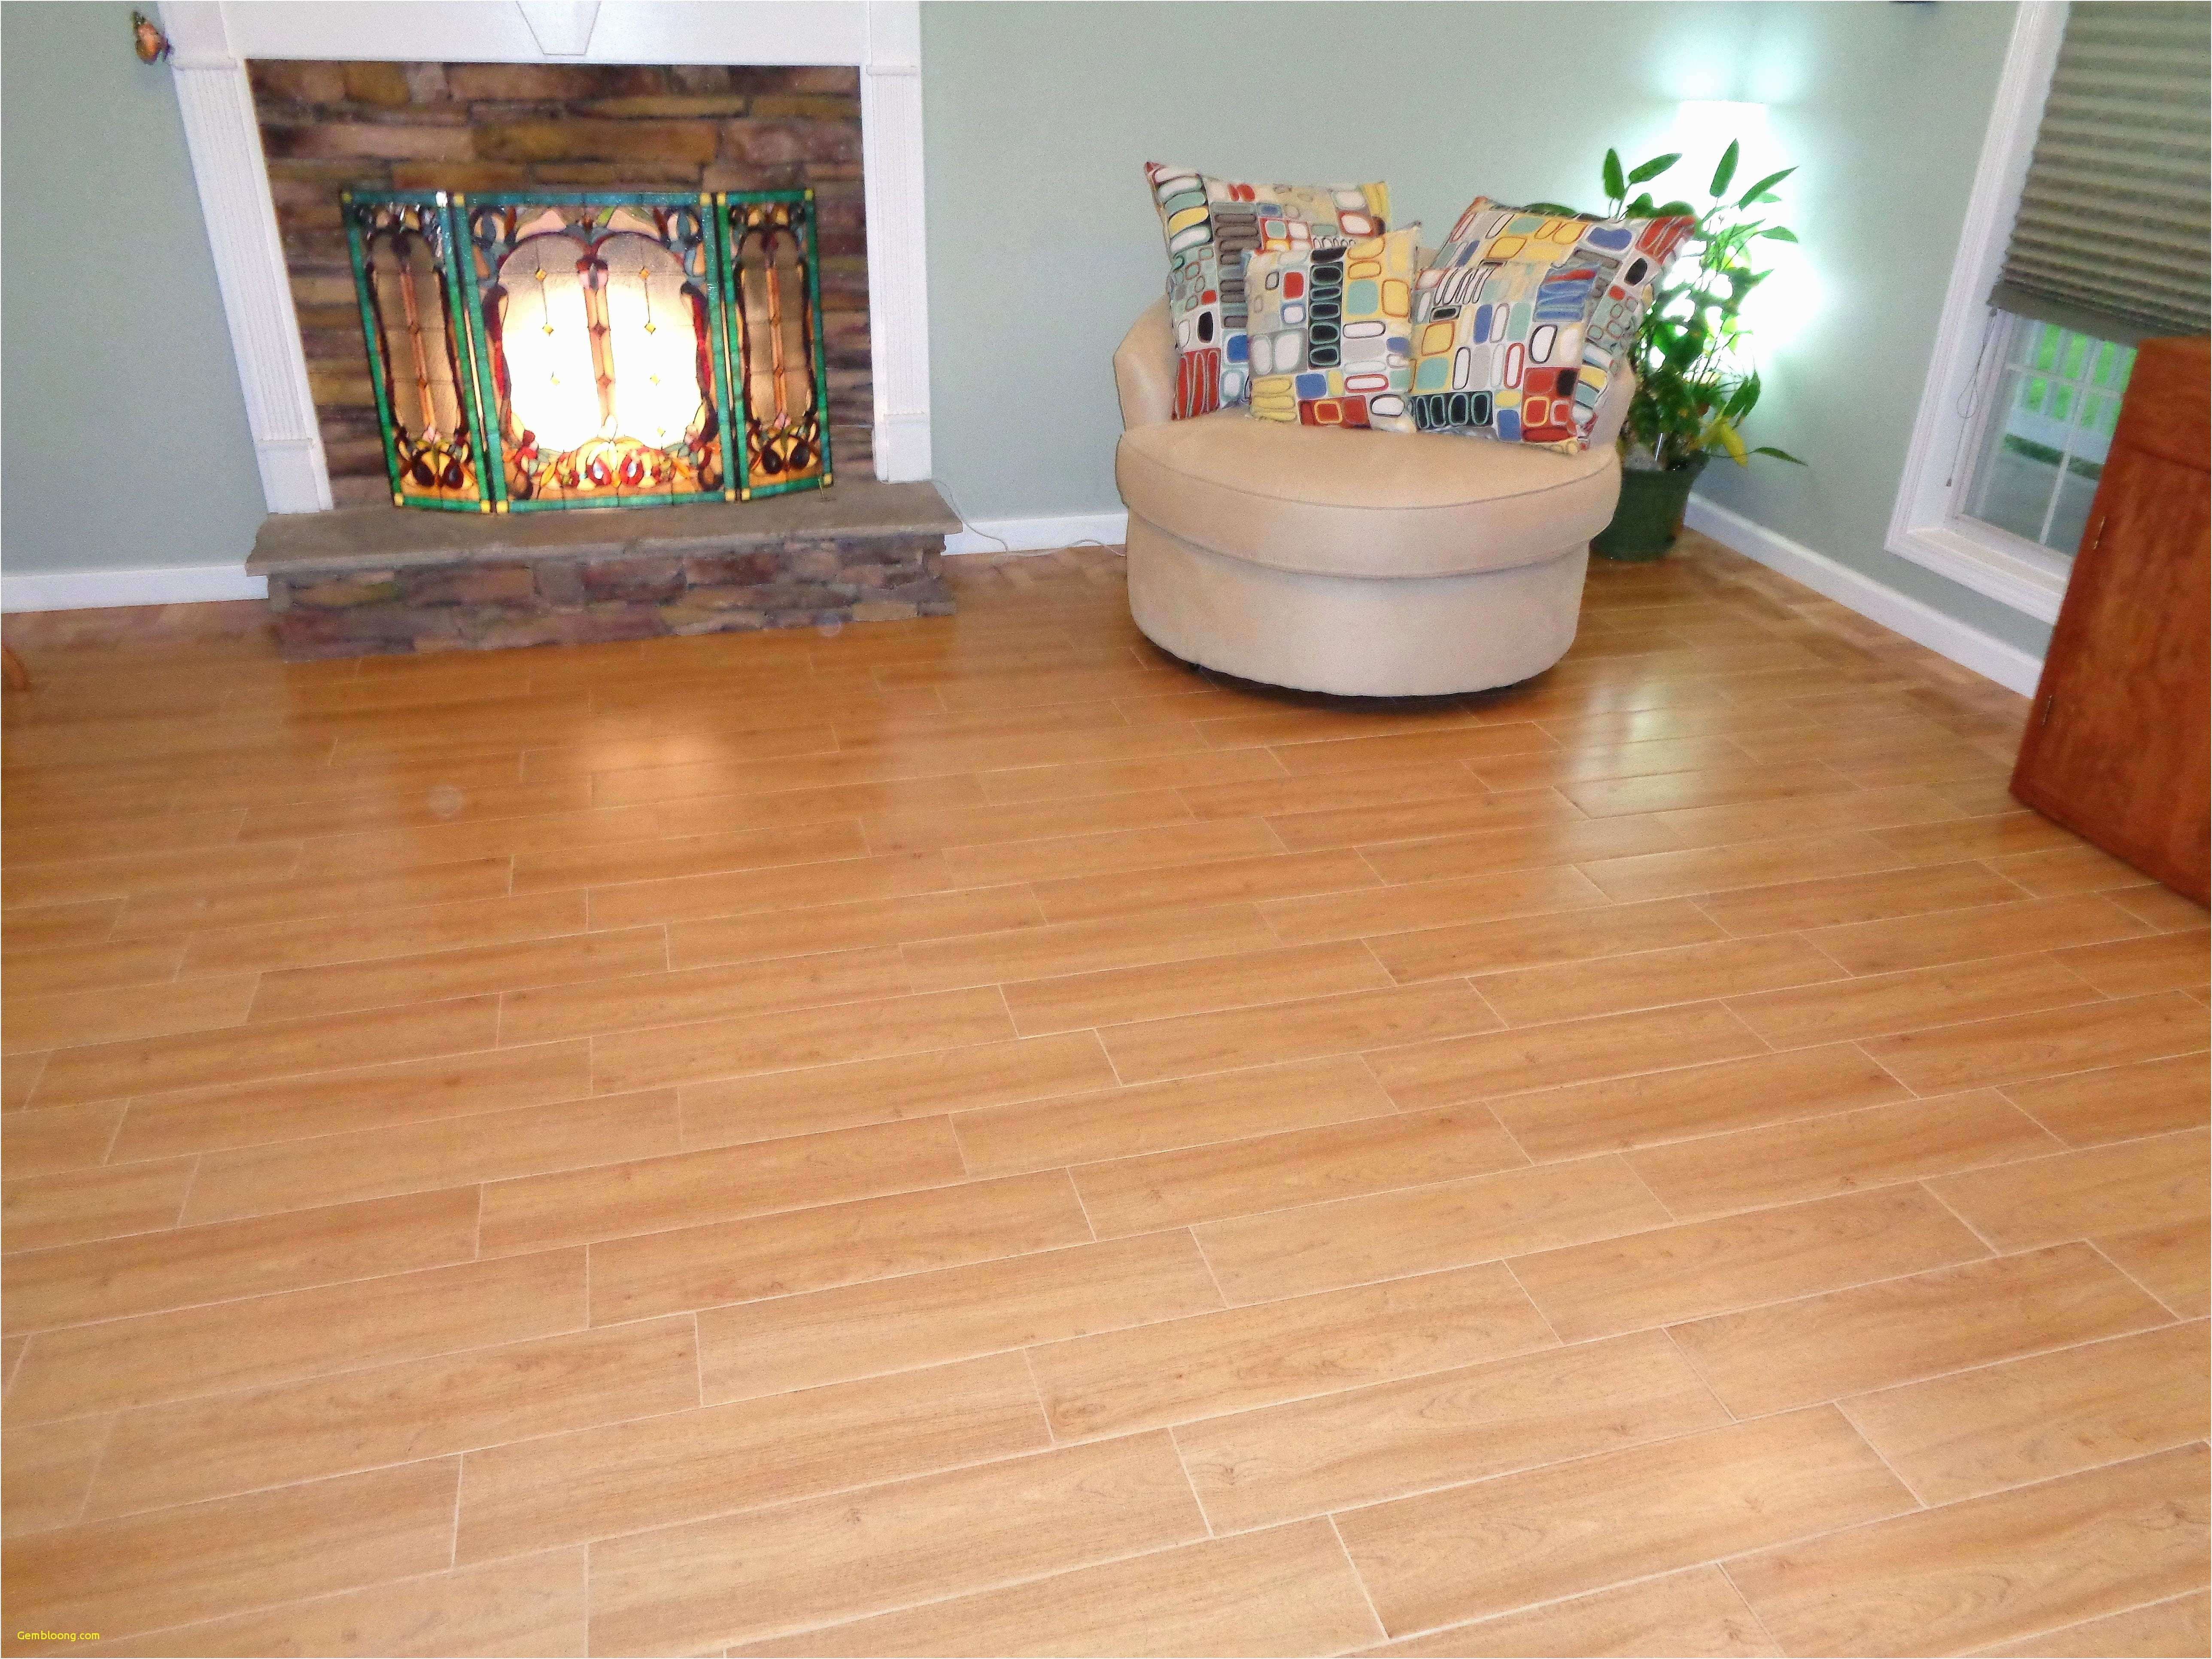 18 Fashionable Floor Padding Under Hardwood 2022 free download floor padding under hardwood of wood for floors facesinnature with regard to discount laminate flooring laminate wood flooring sale best clearance flooring 0d unique